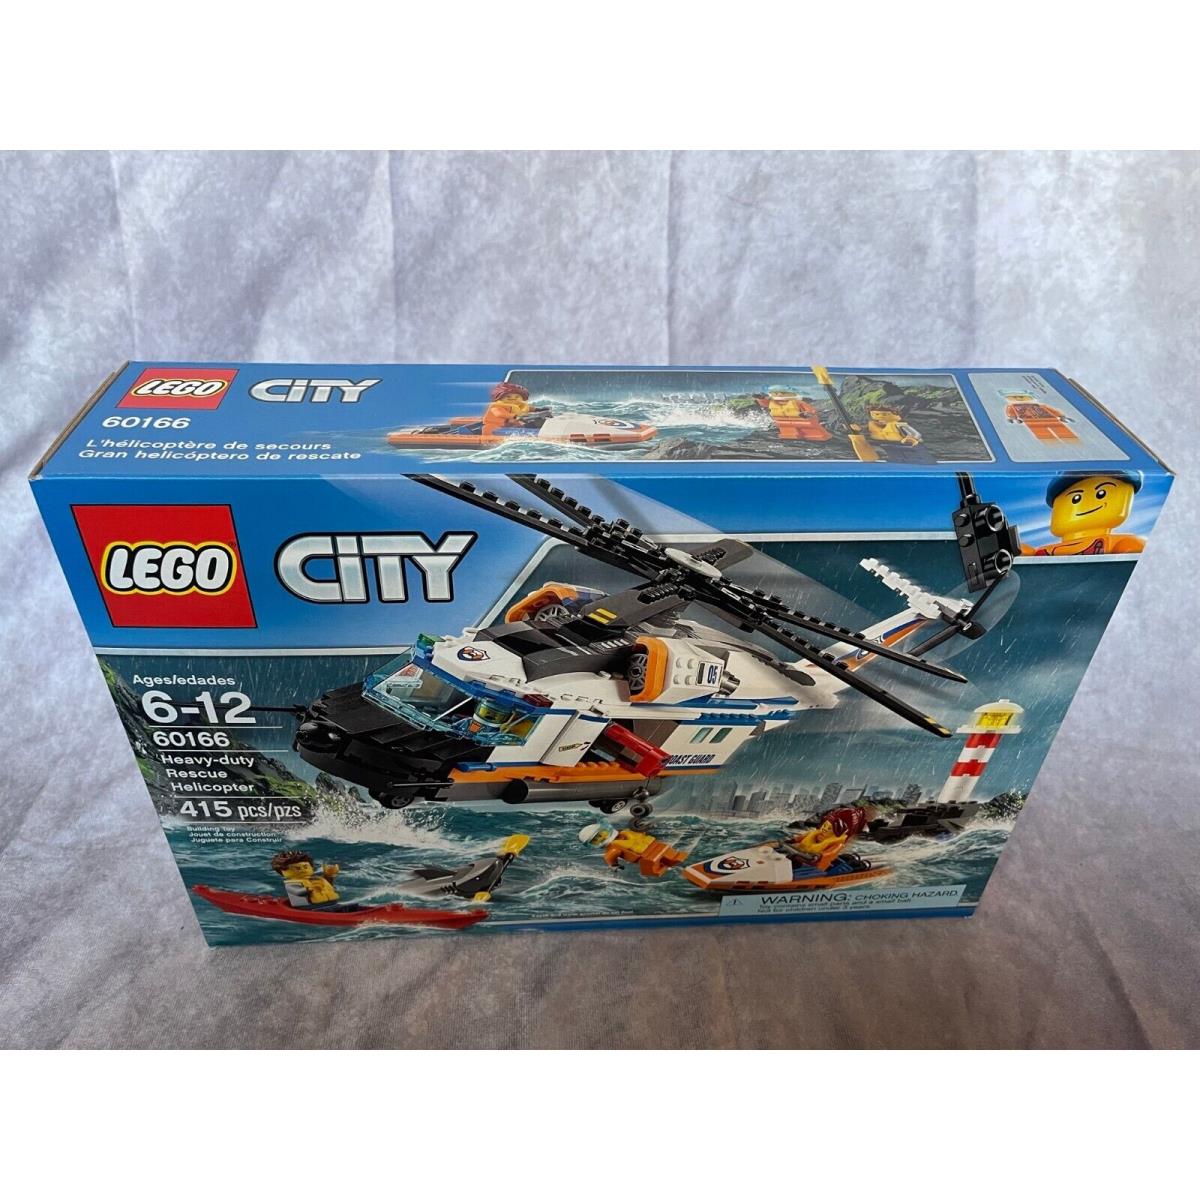 Lego City Heavy-duty Rescue Helicopter 2017 60166 Building Kit 415 Pcs